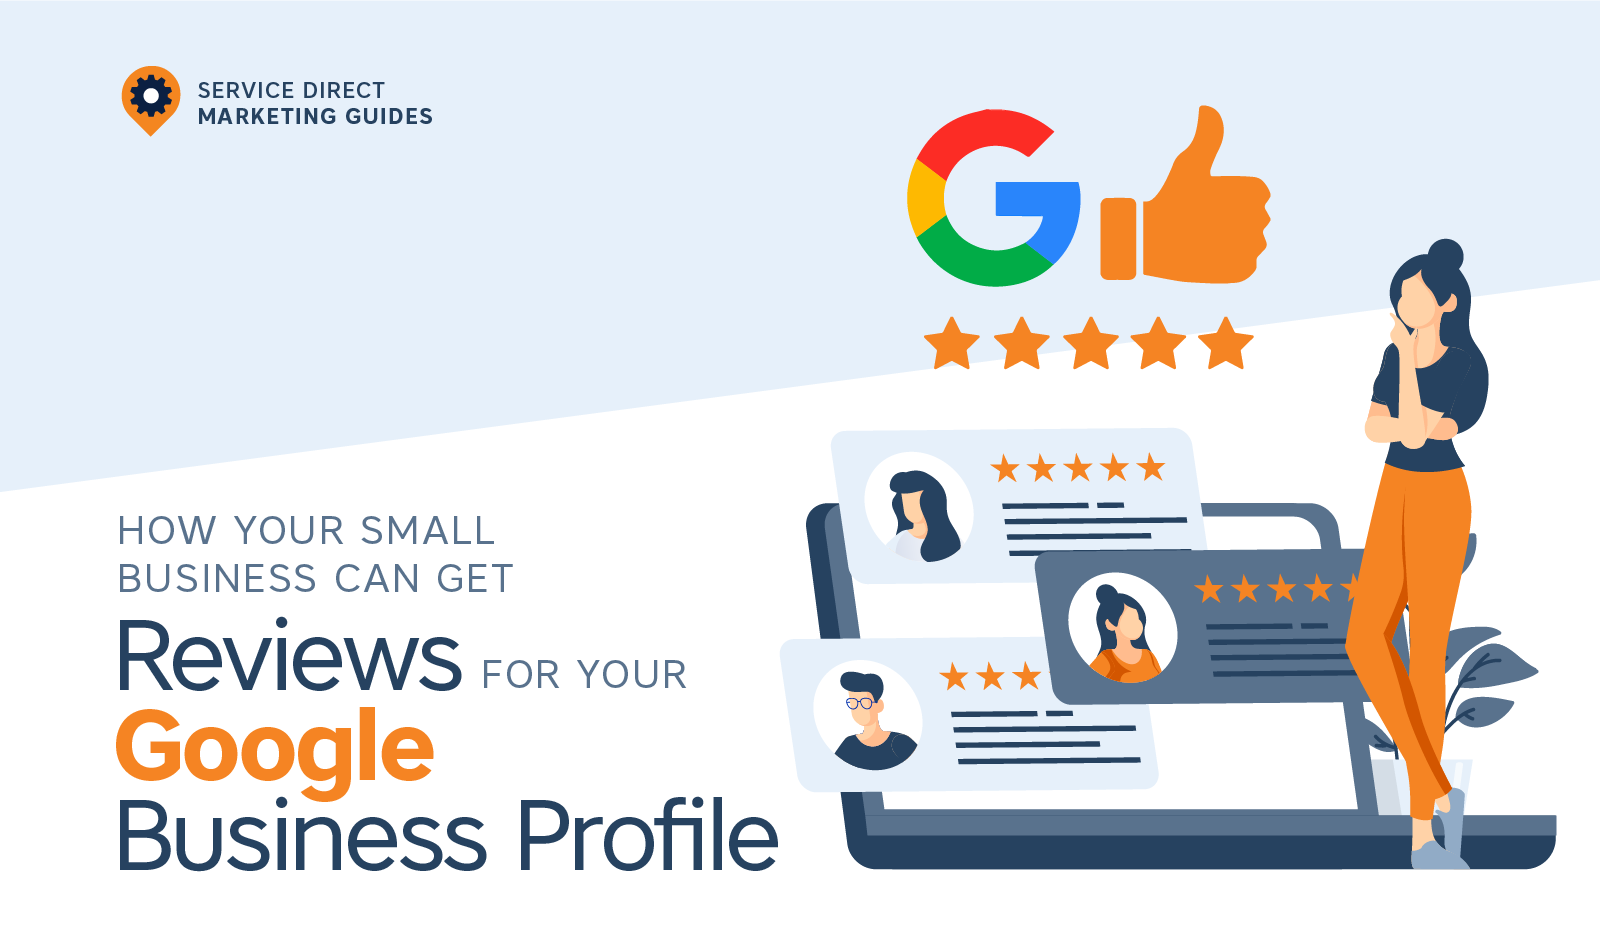 How to Generate Reviews for Your Google Business Profile